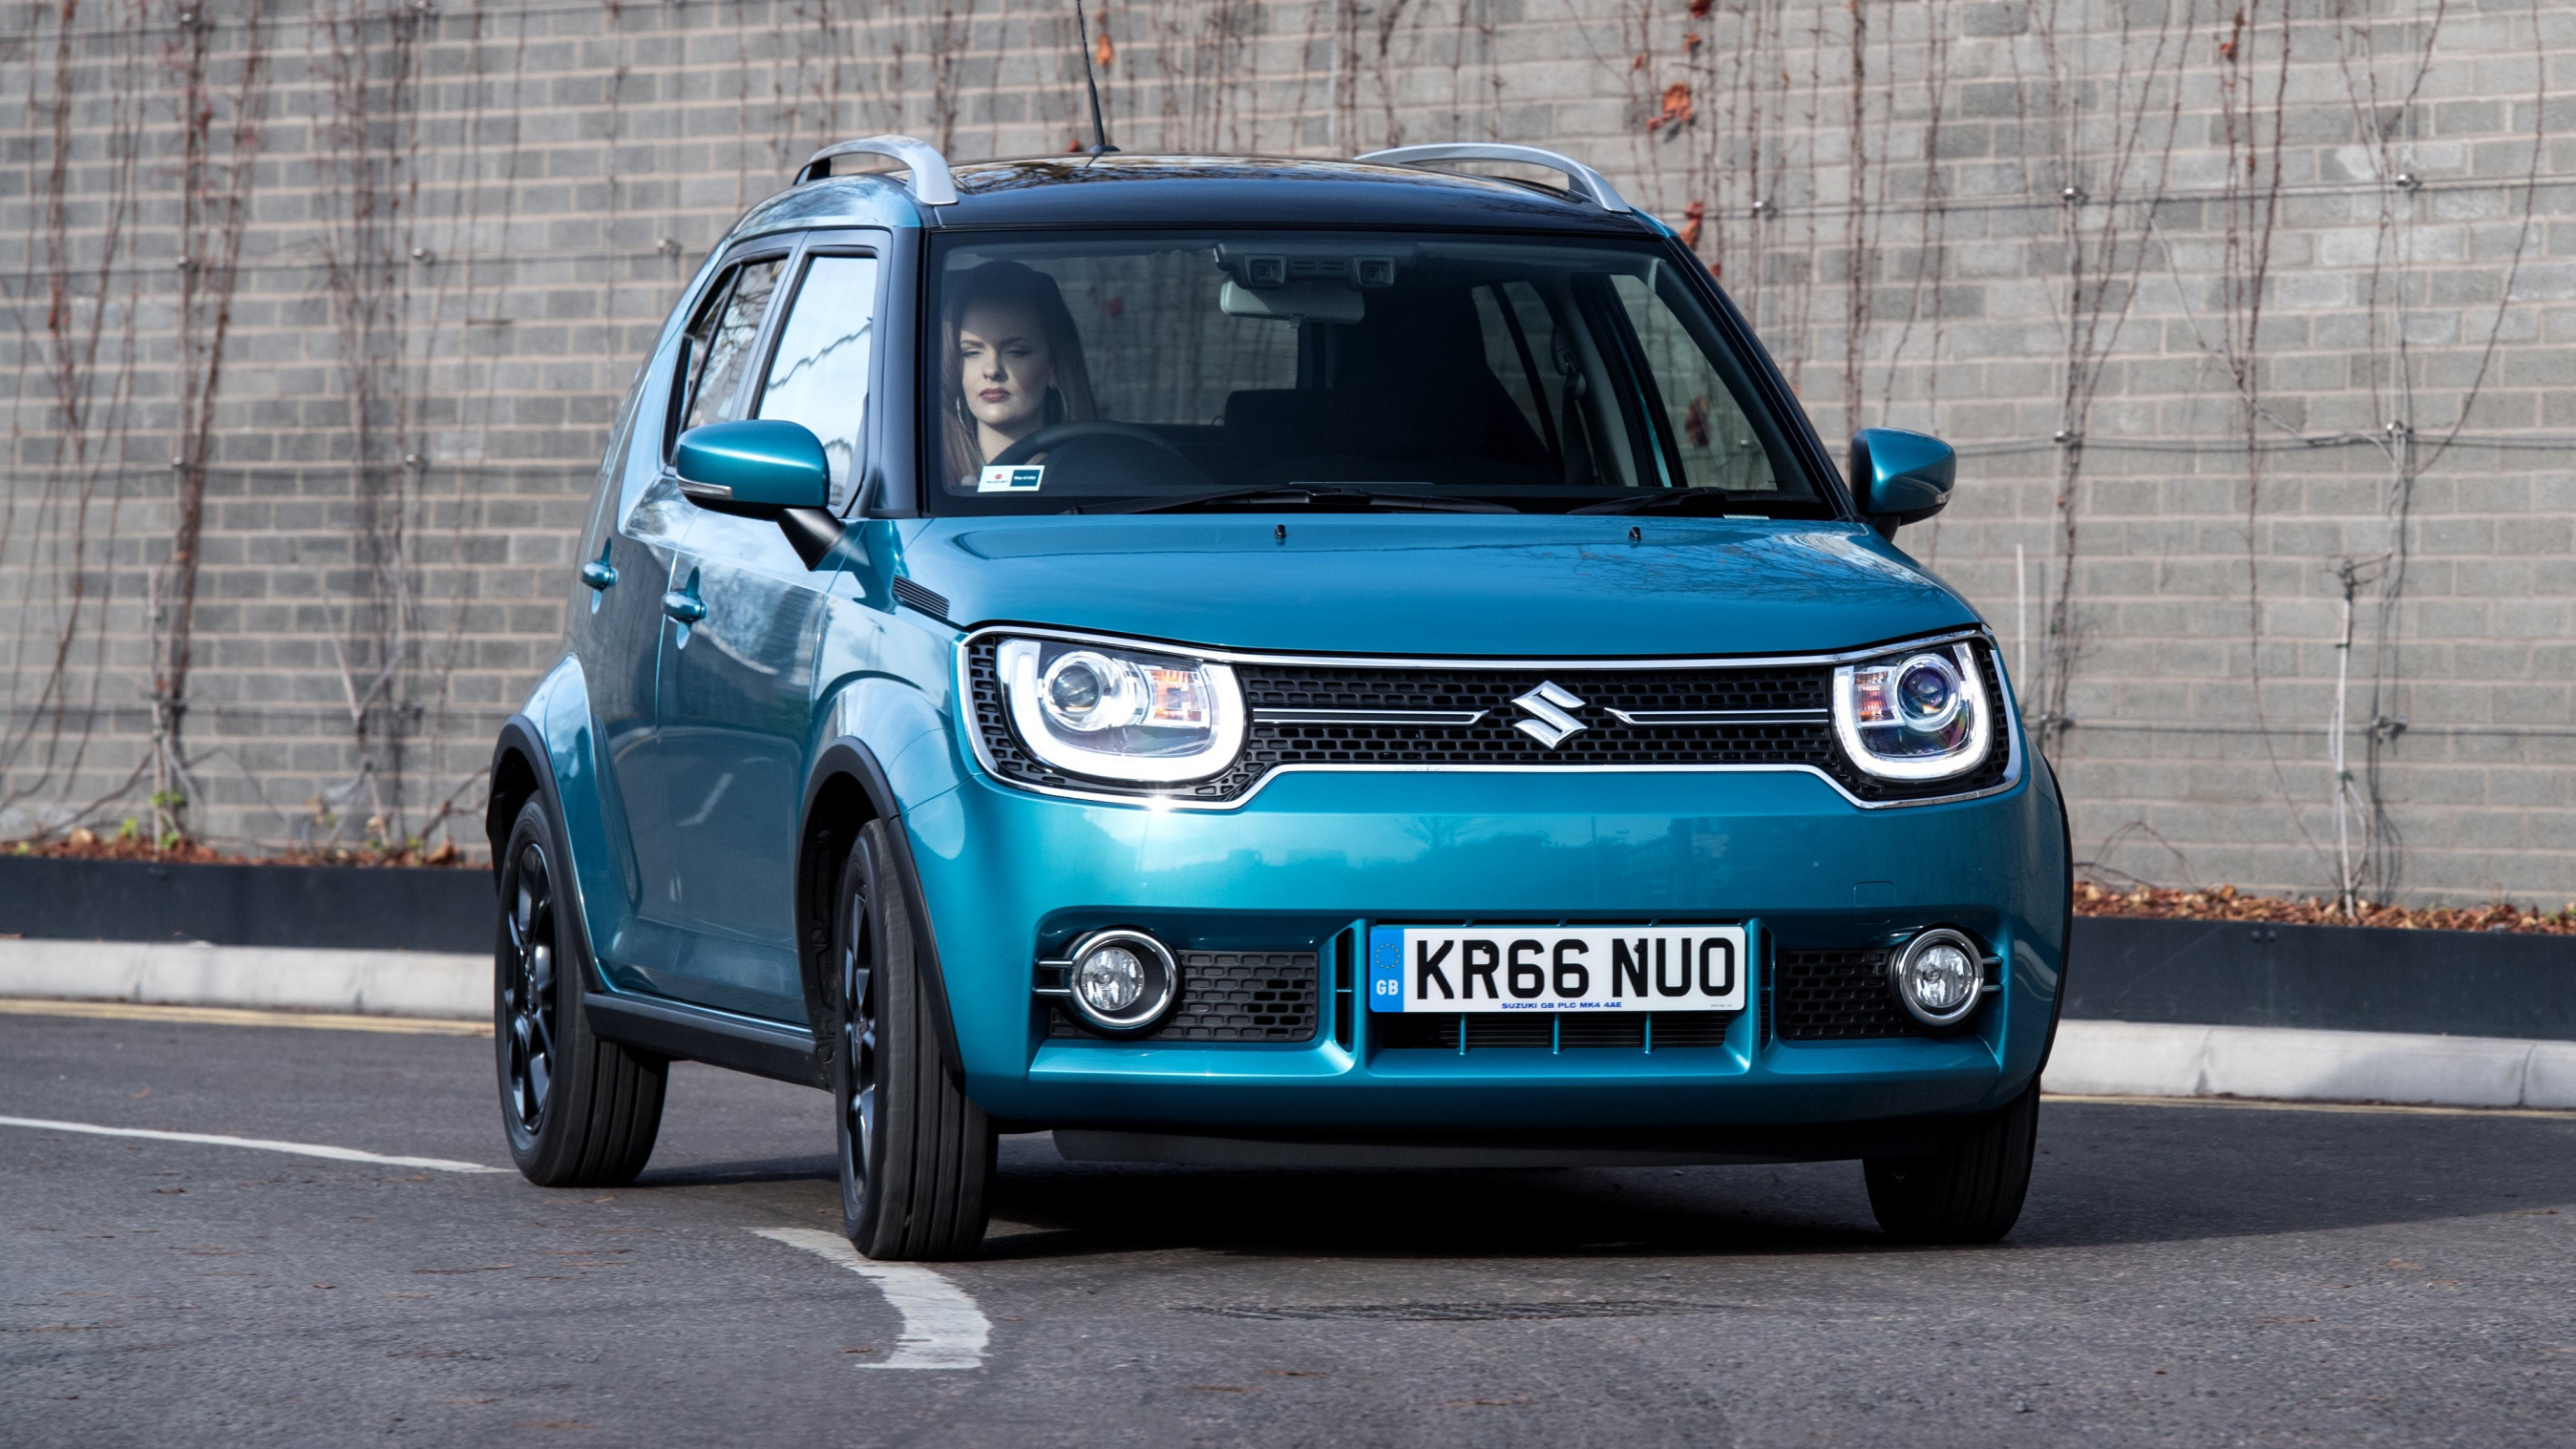 Suzuki Ignis, City crossover review, UK-tested reliability, Top Gear's recommendation, 2700x1520 HD Desktop